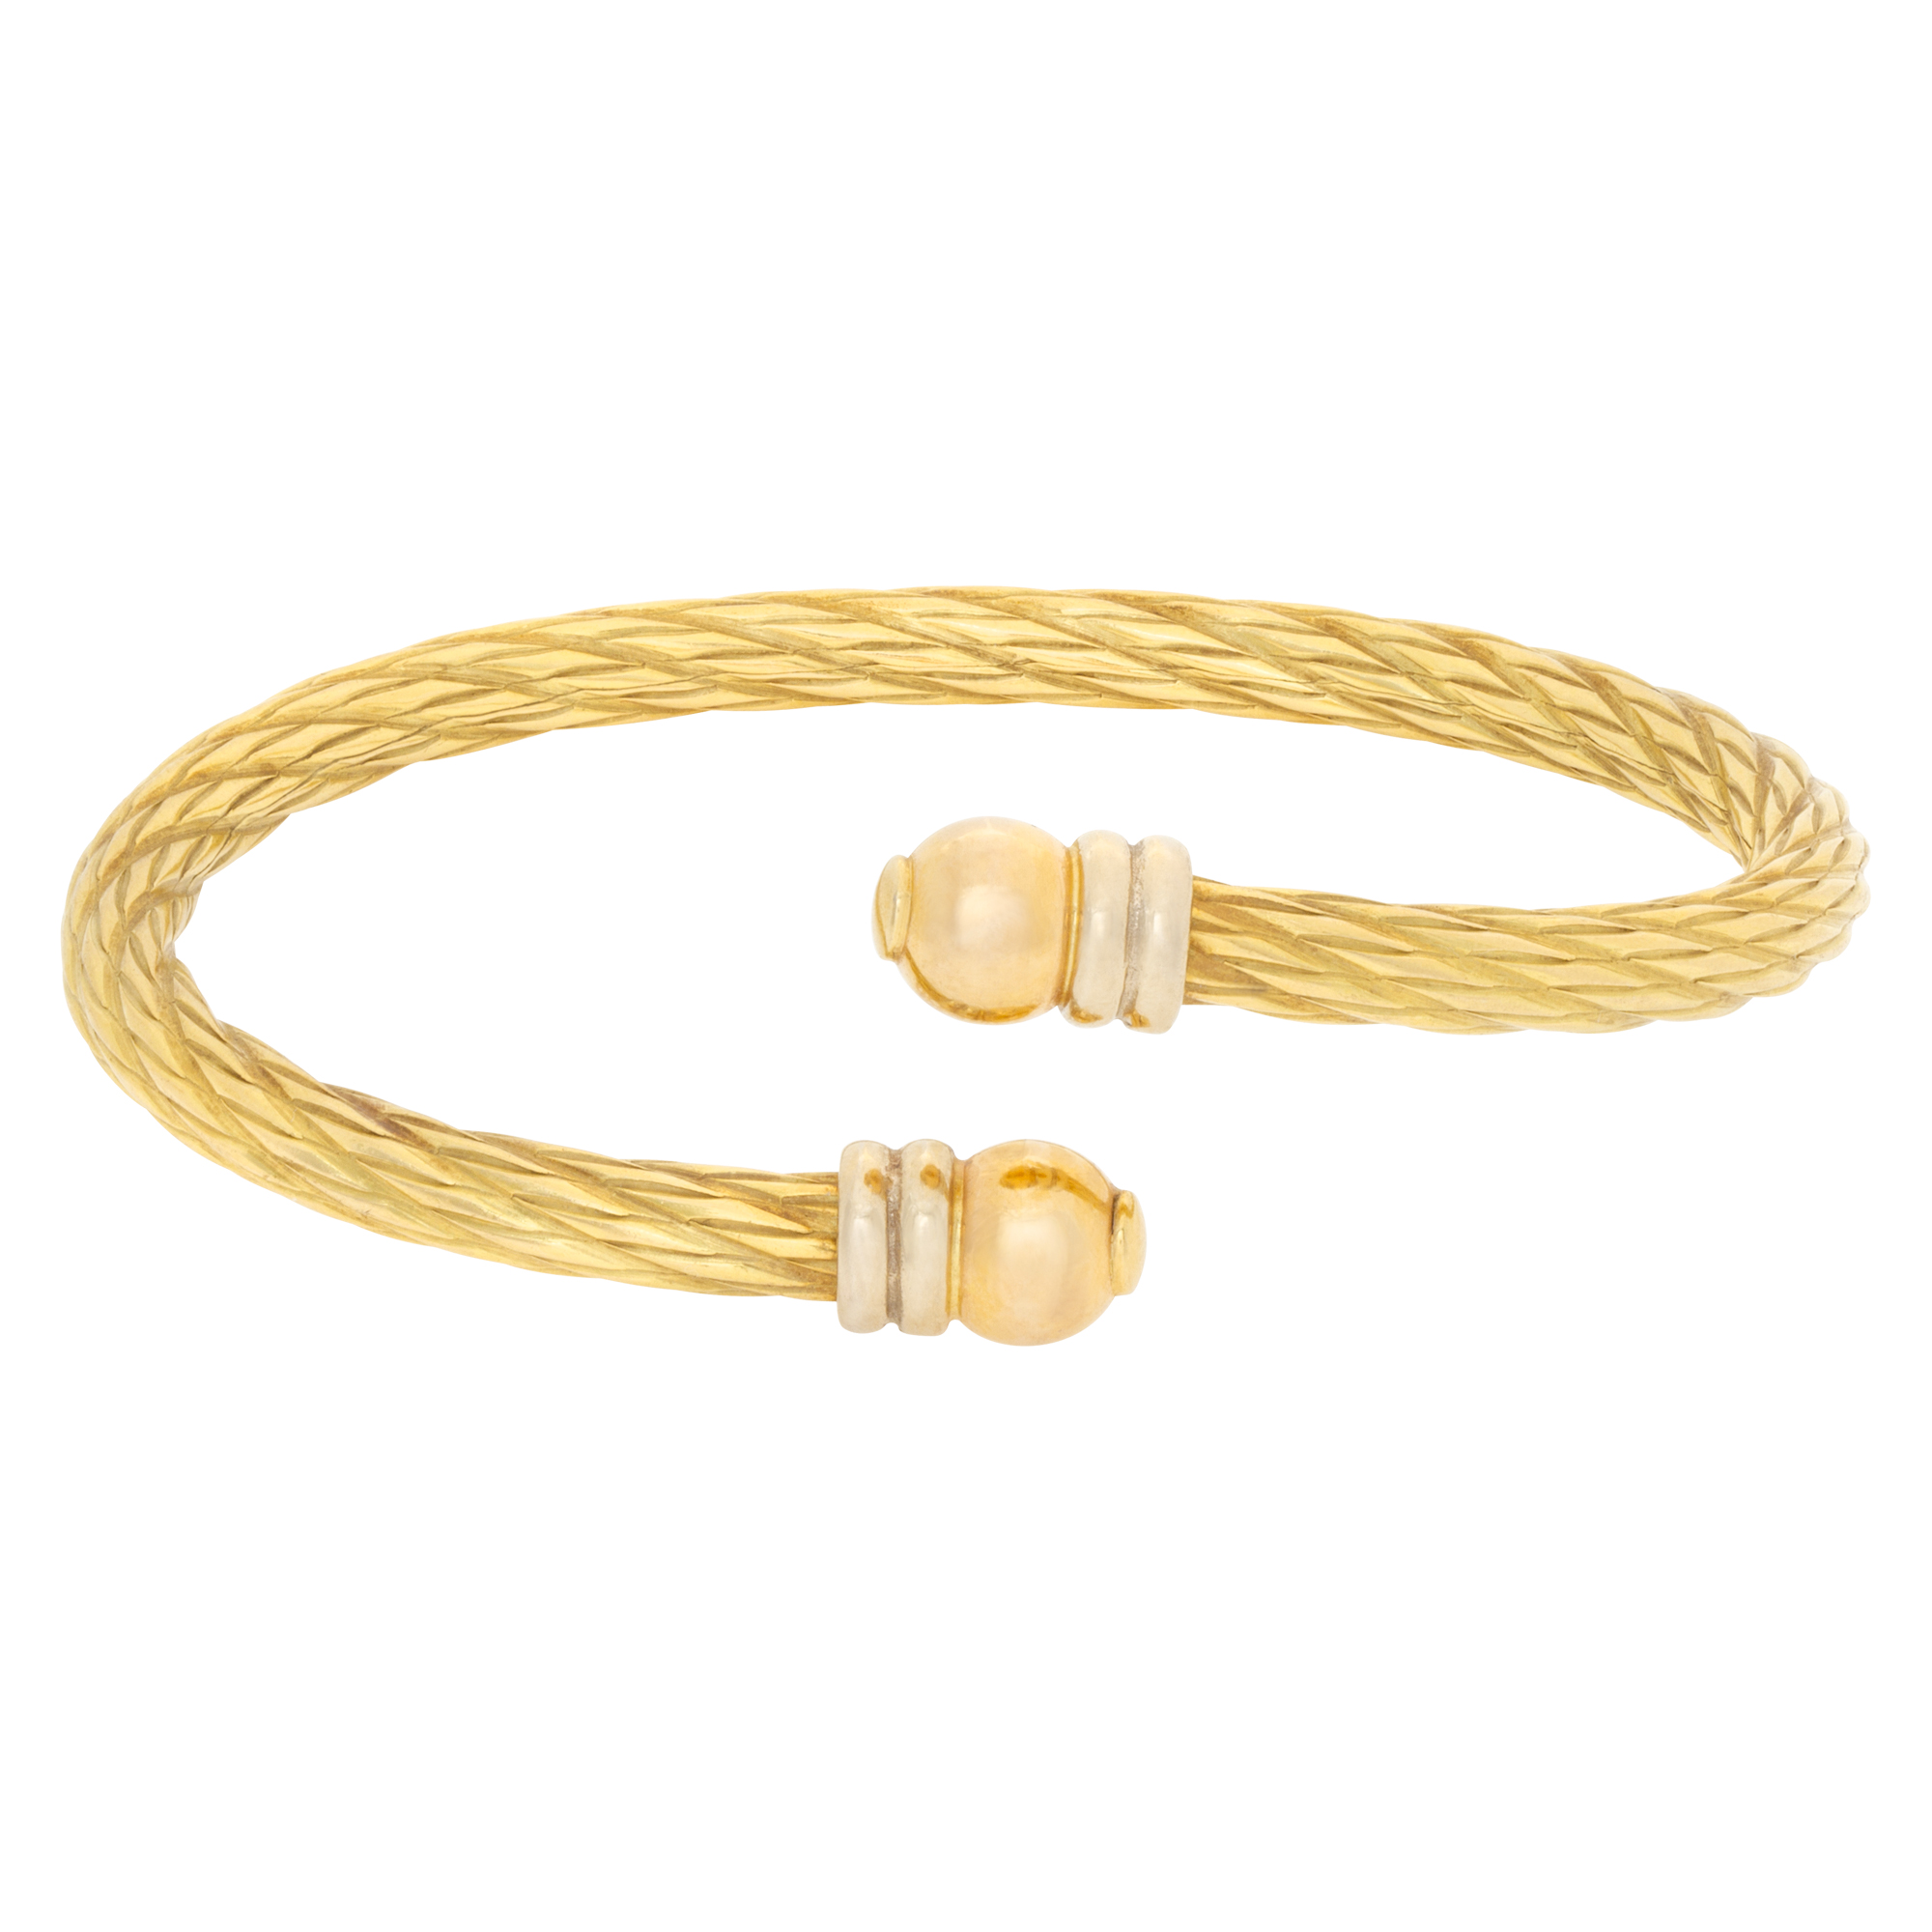 Tri-color (yellow, whte & rose gold) cable bangle